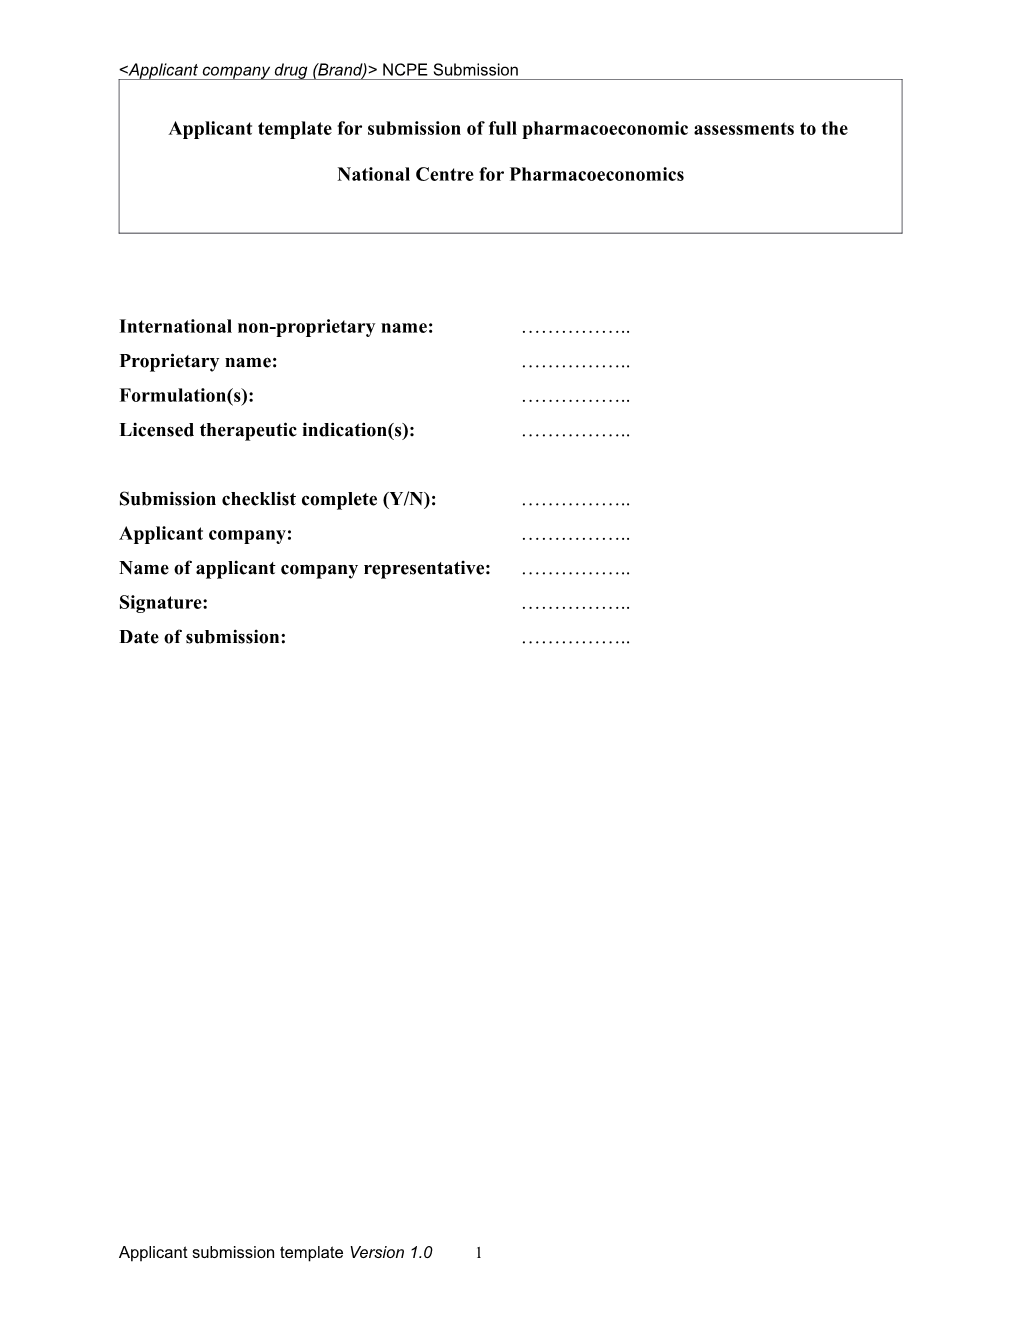 Applicant Template for Submission of Full Pharmacoeconomic Assessments to The